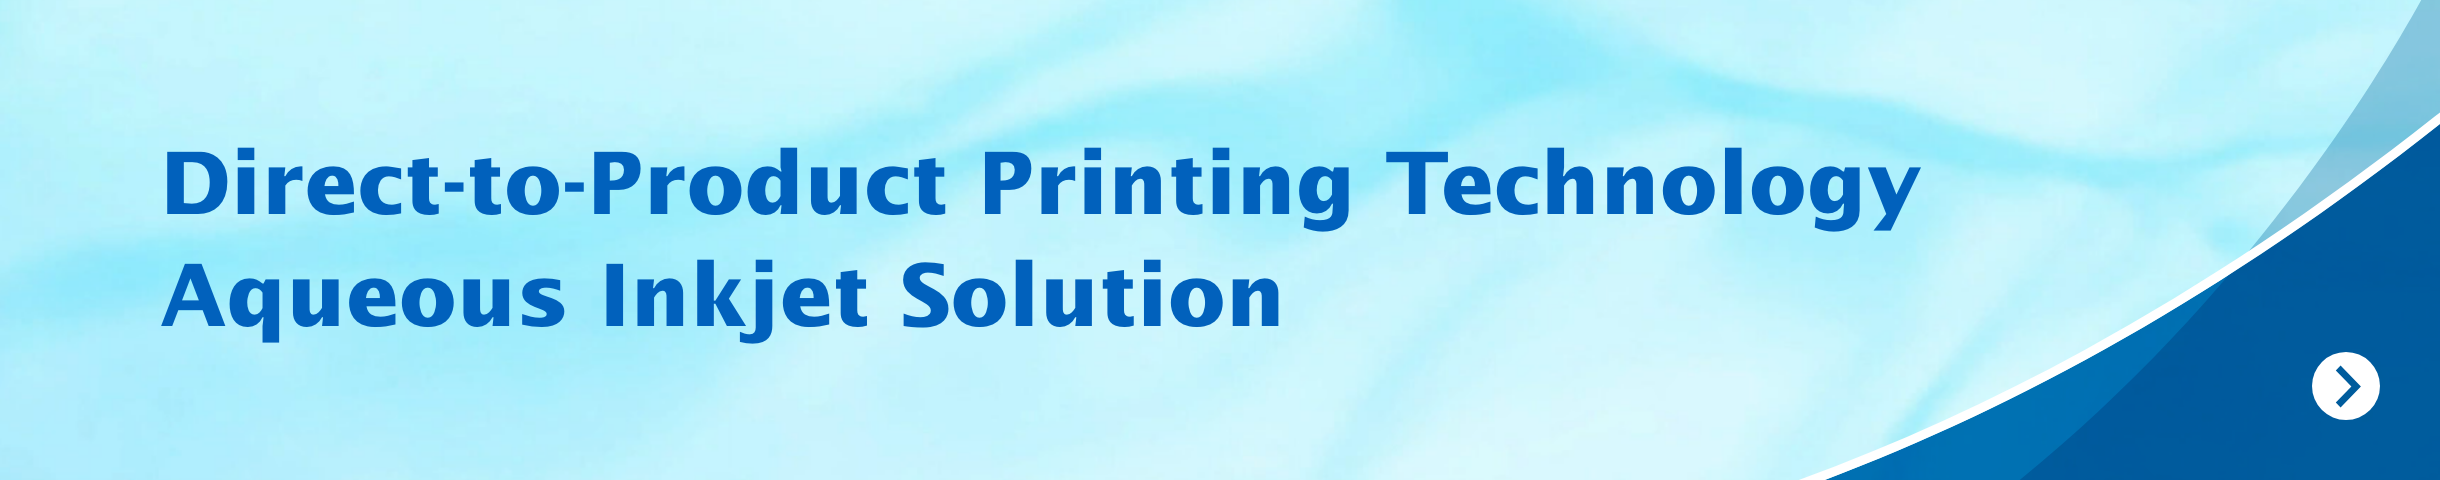 Direct-to-Product Printing Technology Aqueous Inkjet Solution